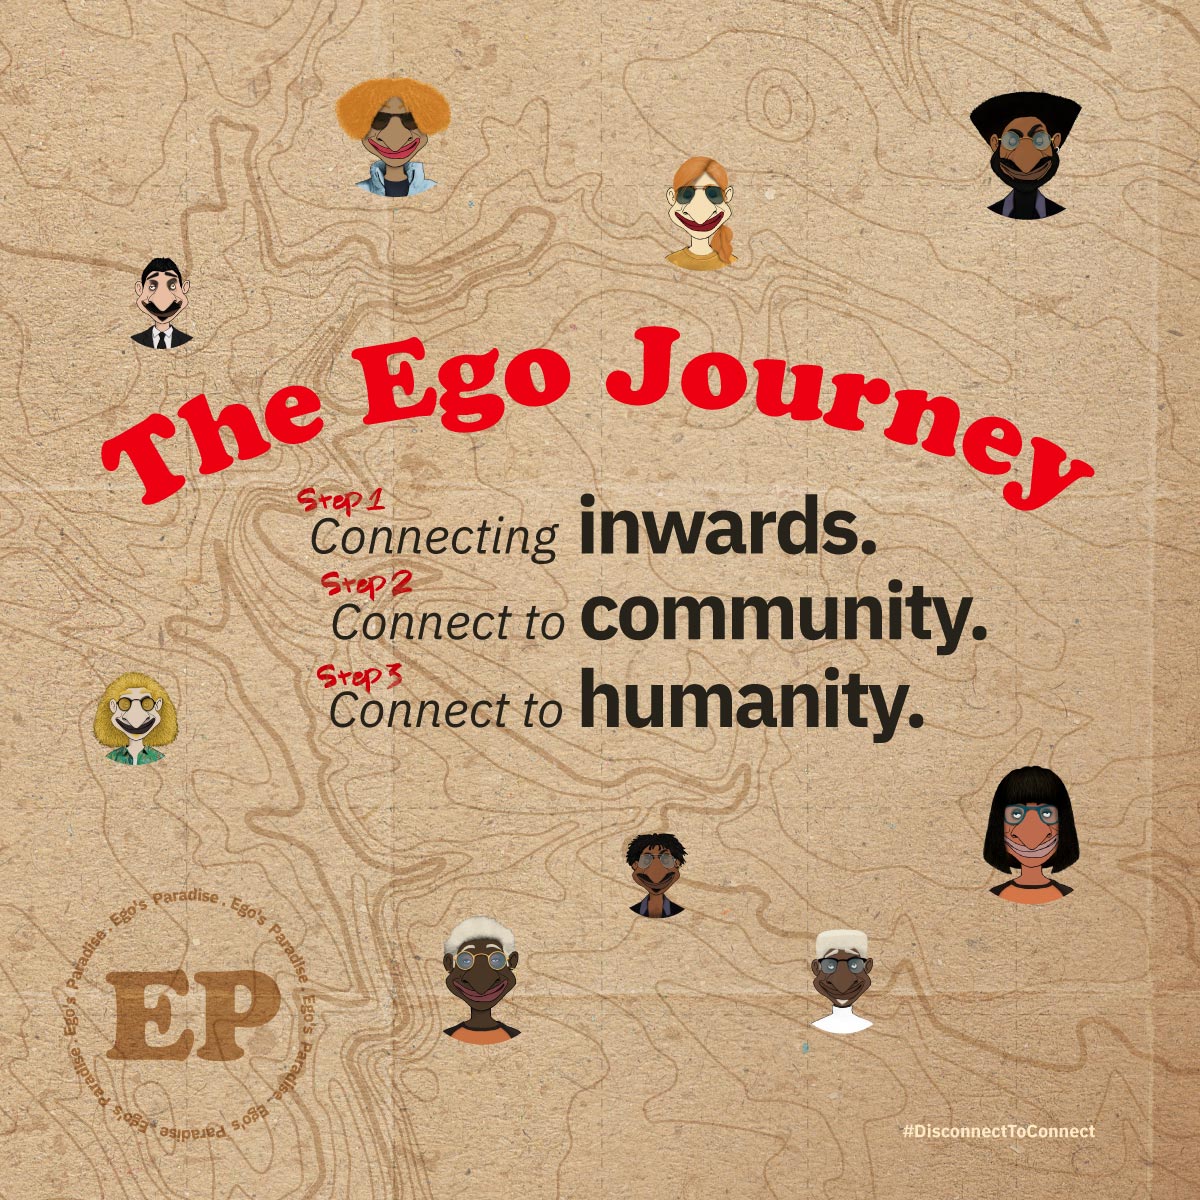 The Ego Journey is all about building a robust multi-tier connection:

▶️ Step 1: Connecting inwards
▶️ Step 2: Connect to community 
▶️ Step 3: Connect to humanity

Join the Journey!

#EverybodyCounts #DisconnectToConnect #NFTCommunity